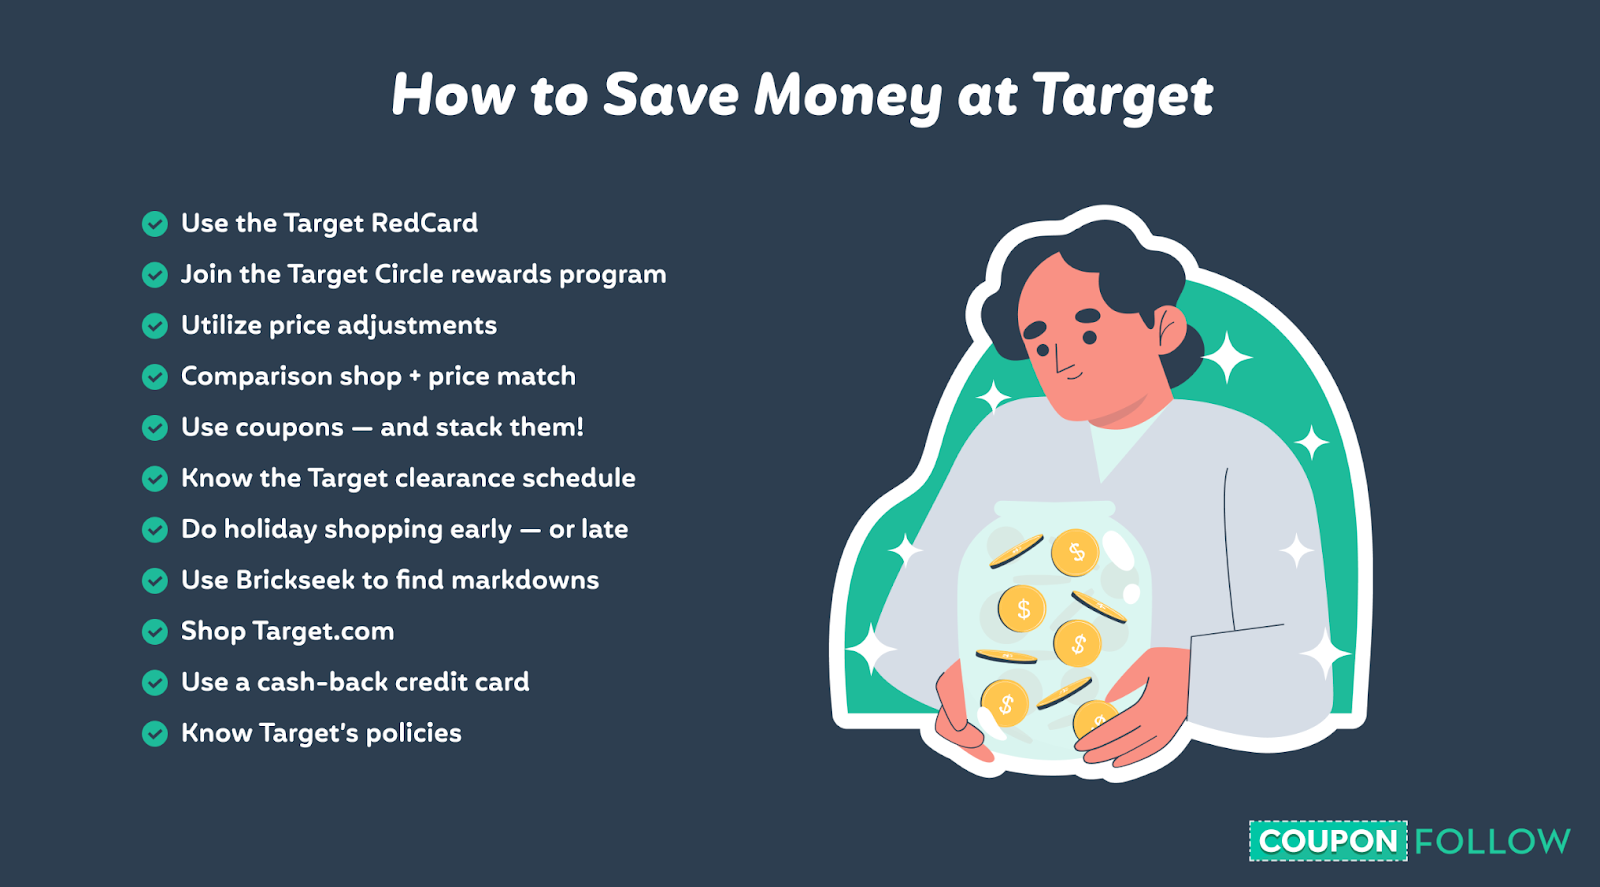 Target is Giving You *All the Ways to Save* with Four Weeks of